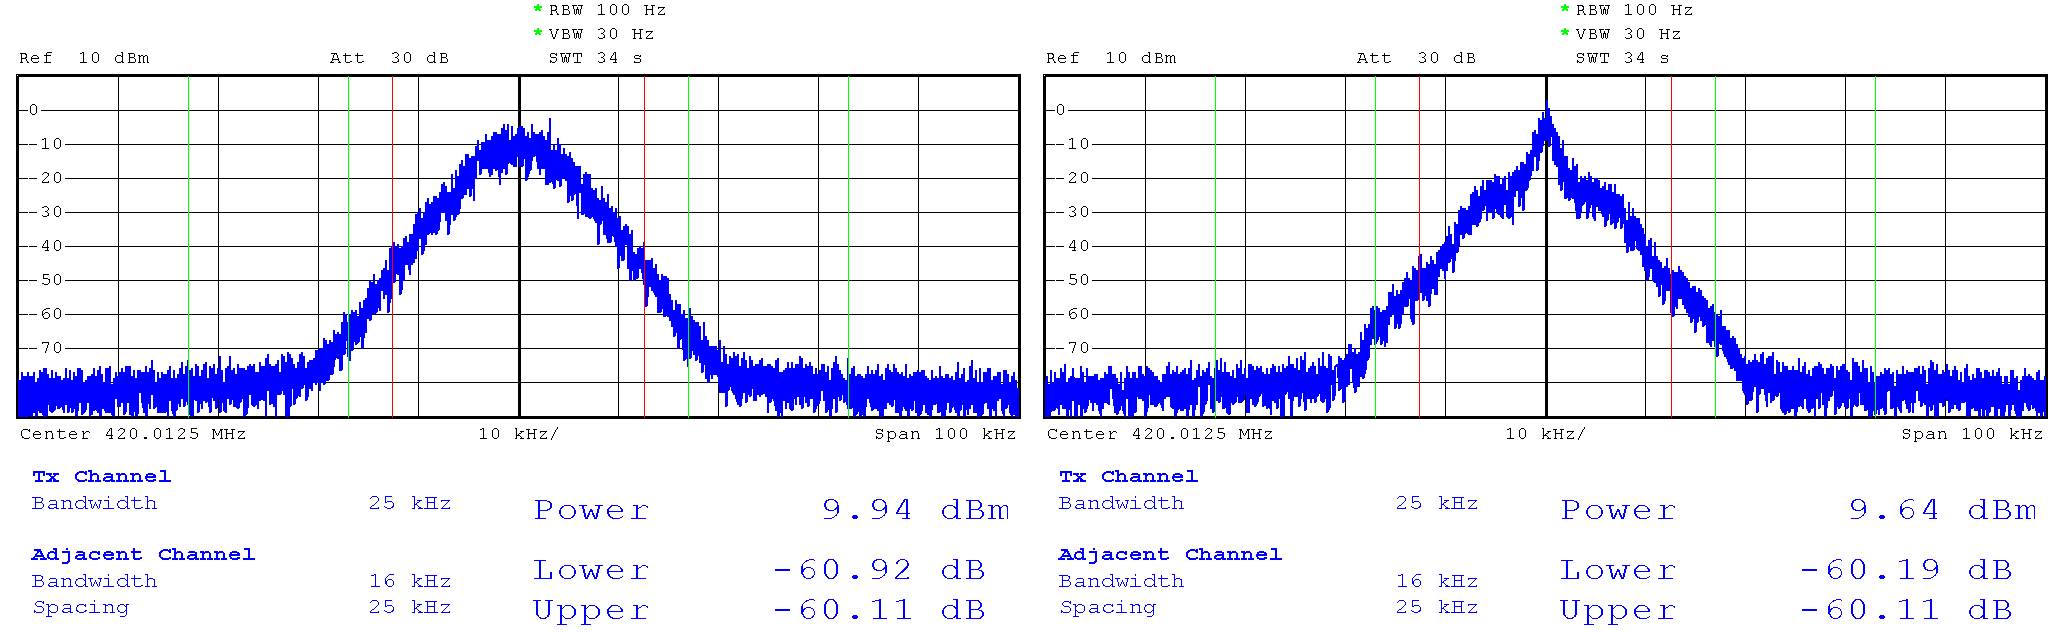 Modulated signal spectrums. (left) 4CPFSK with R=10.4 kBaud, modulation index h~0.3. (right) 4CPFSK with R=17.3 kBaud, modulation index h~0.1.